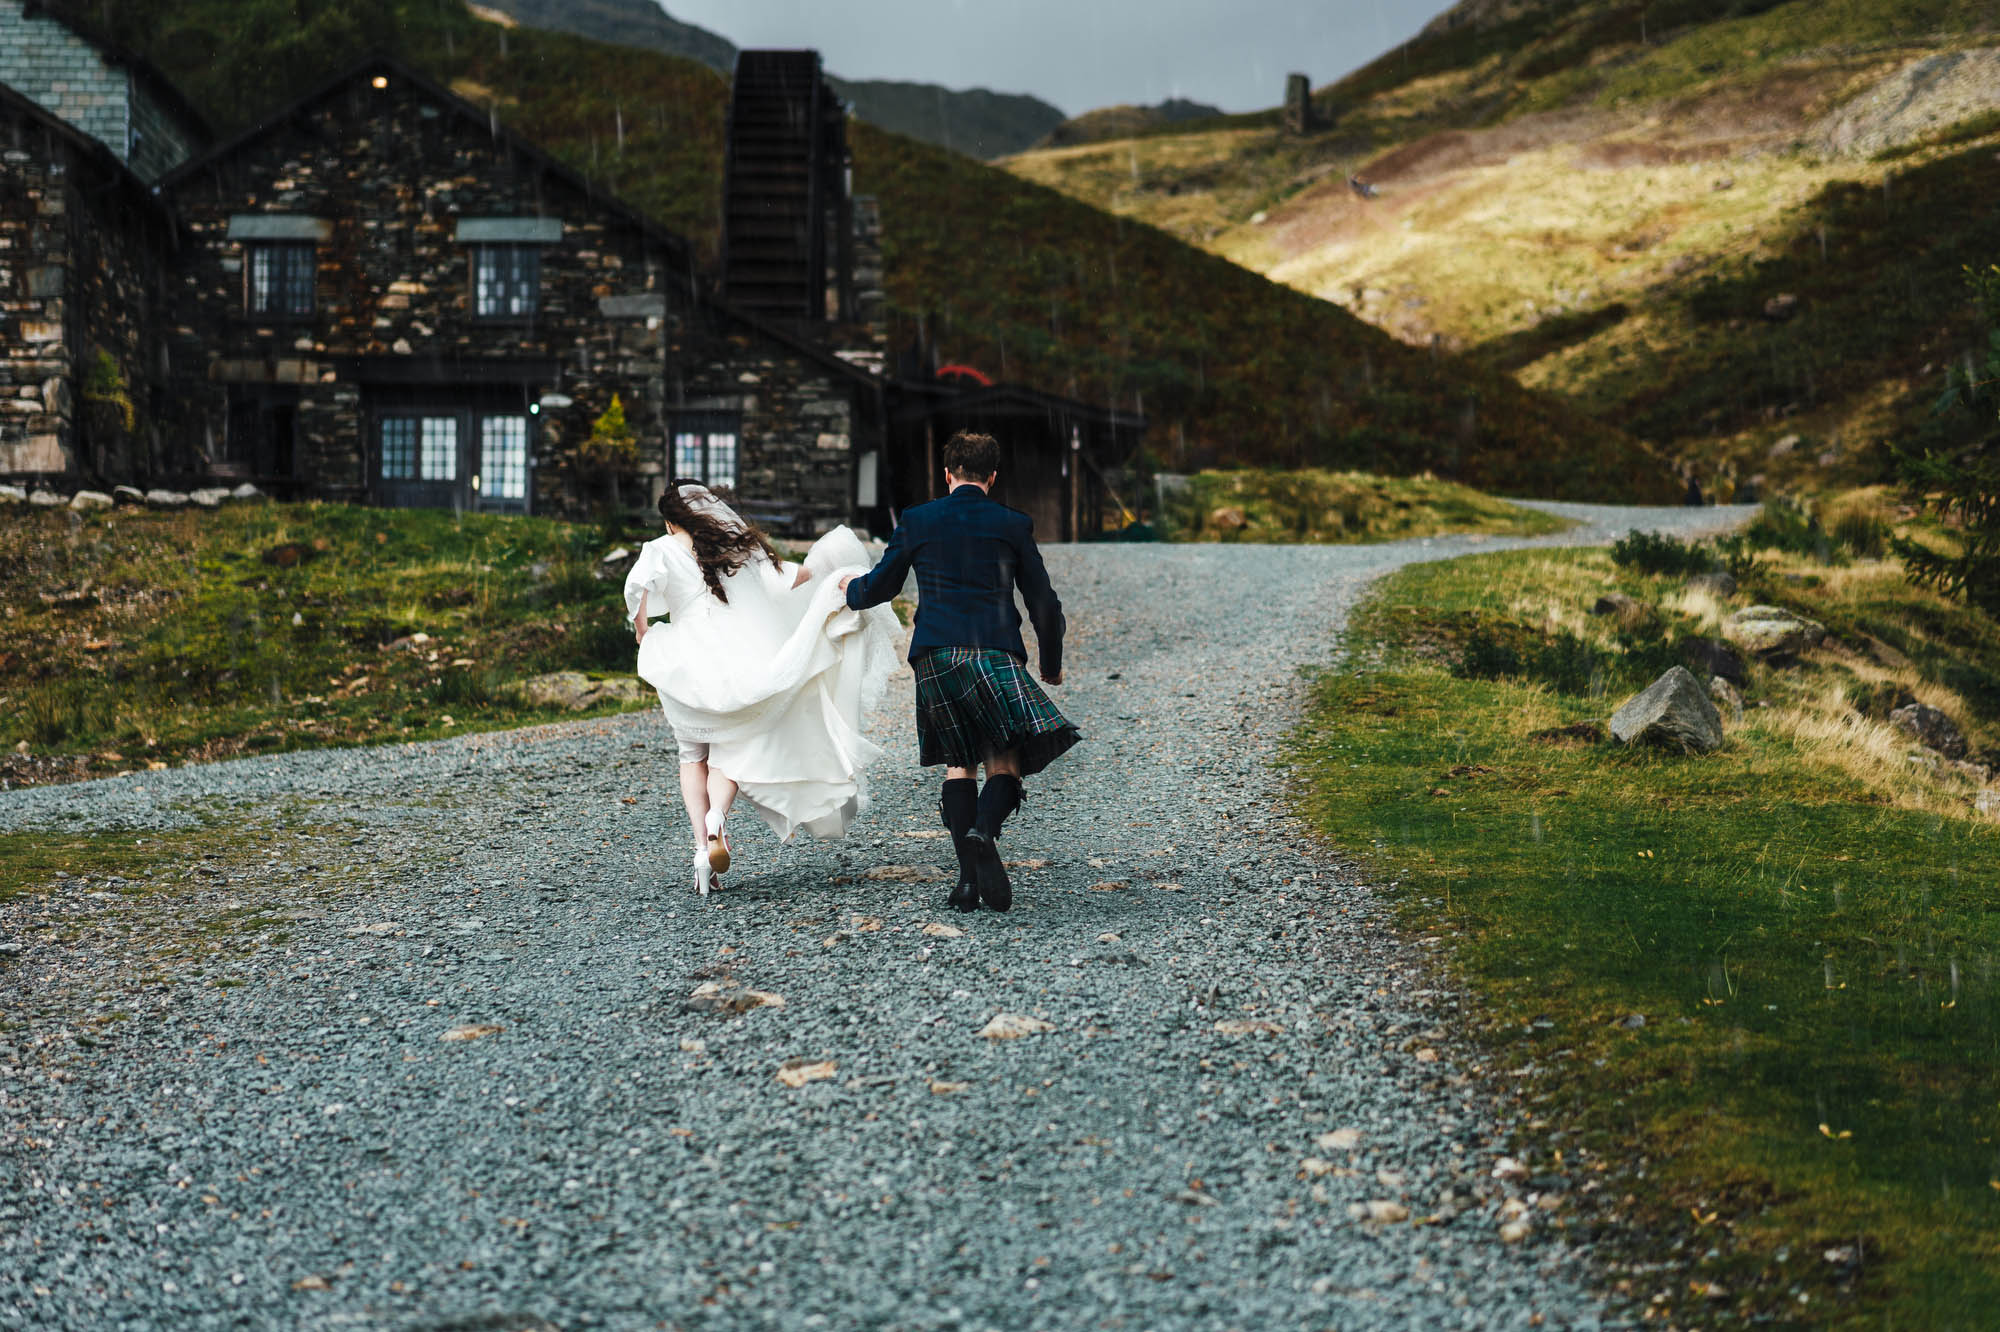 Groom and bride walking towards the Coppermines Cottages in Coniston - credit Hannah Hall Photography